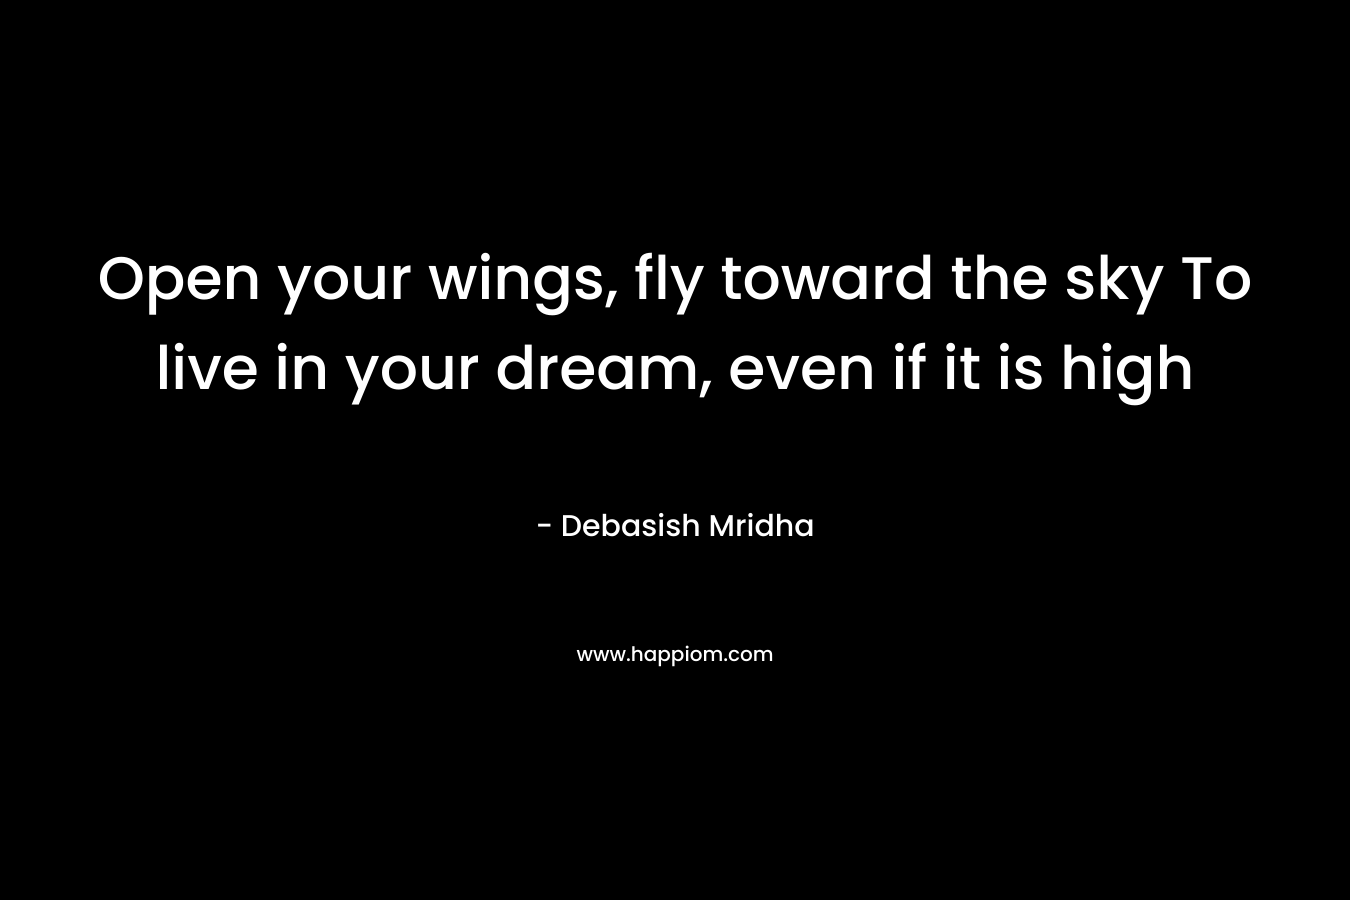 Open your wings, fly toward the sky To live in your dream, even if it is high